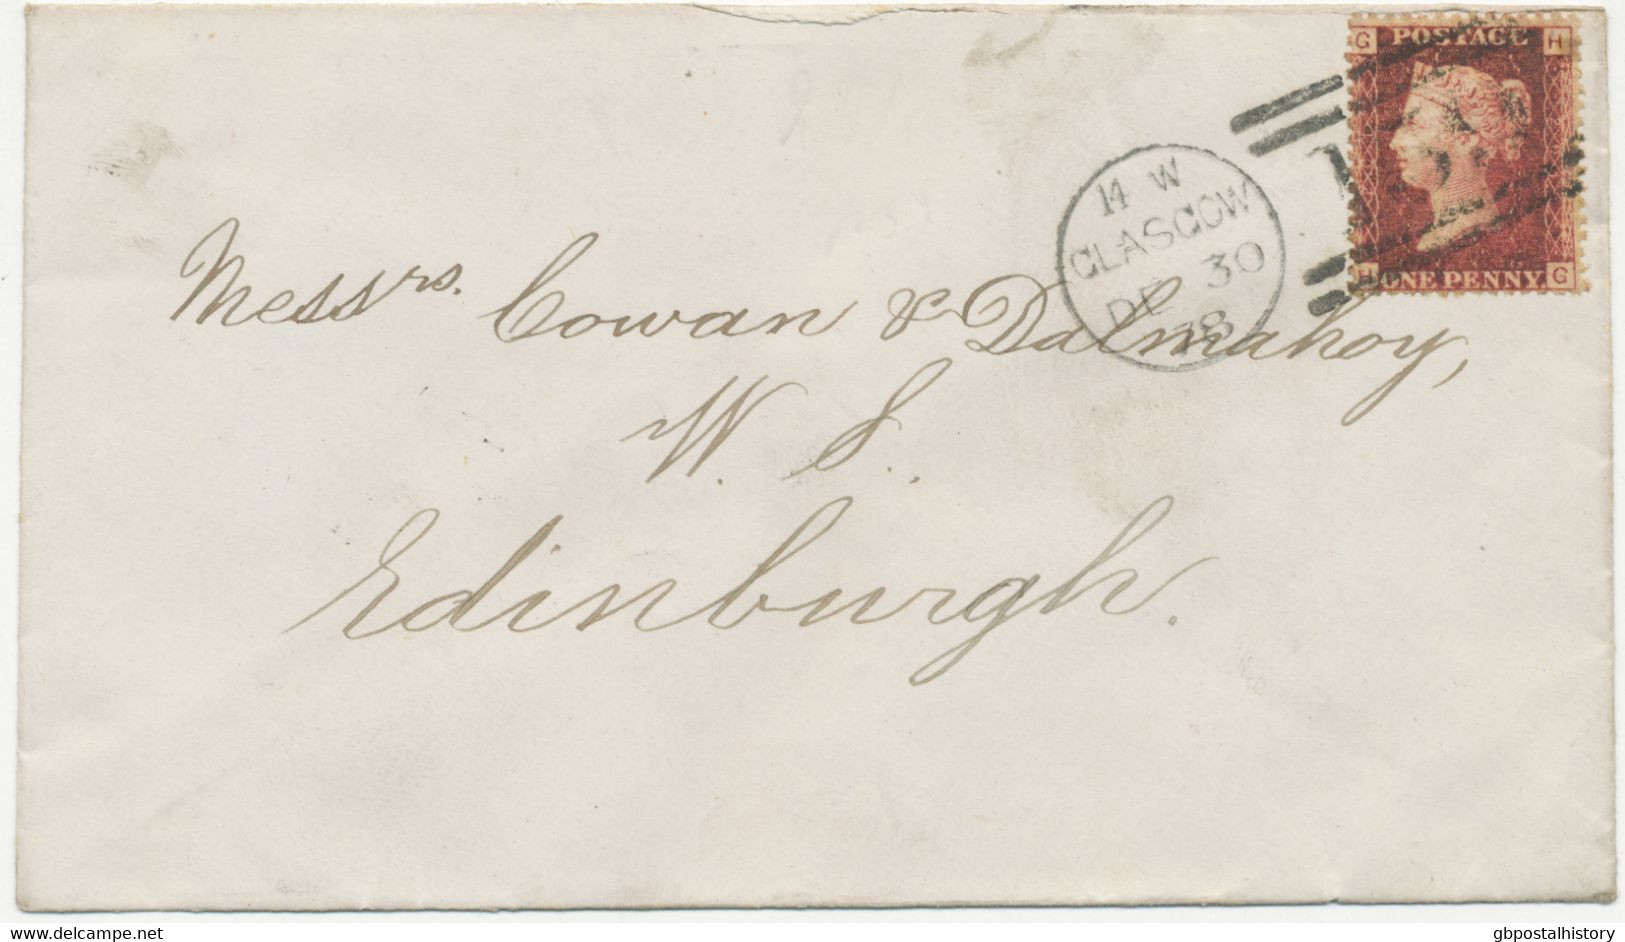 GB „159 / GLASGOW“ Scottish Duplex On Superb Cover With QV 1d Red Plate 201 (HG) - Lettres & Documents